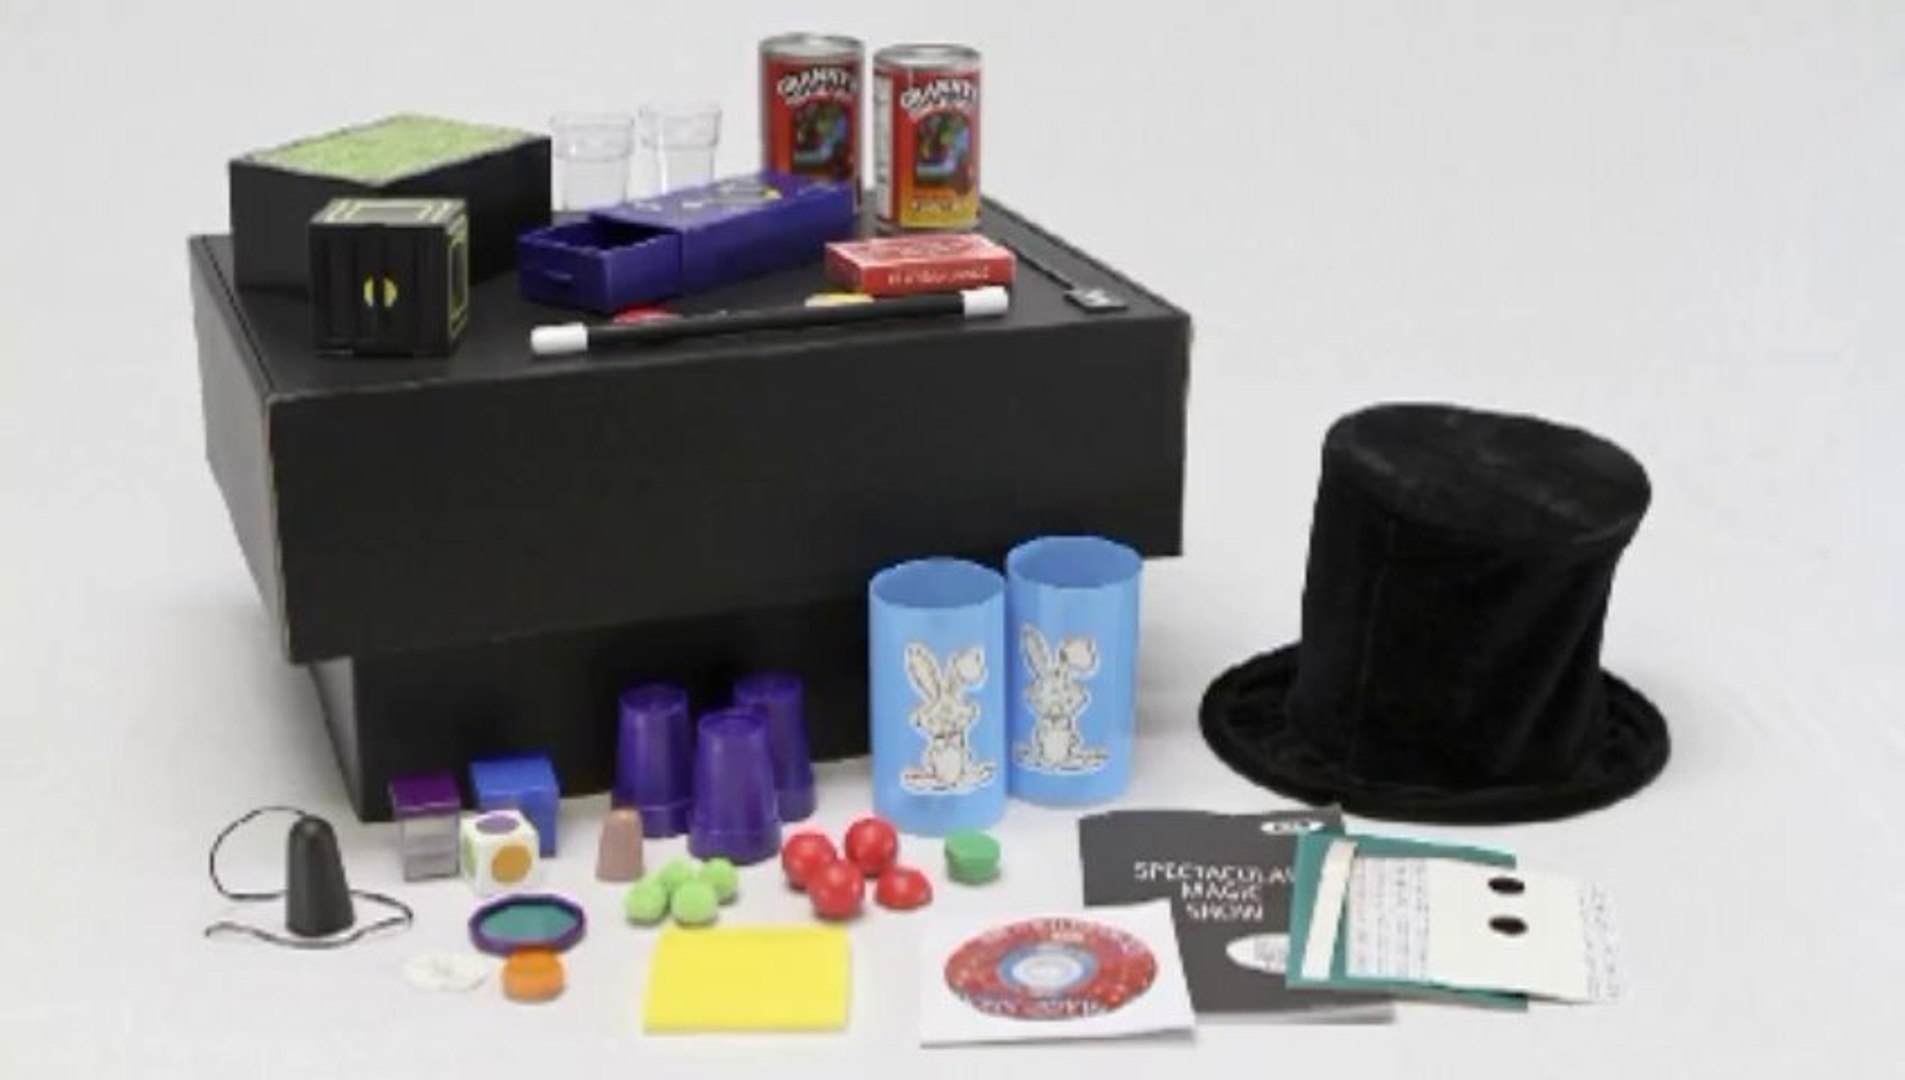 Ideal 100-Trick Spectacular Magic Show Suitcase for sale online